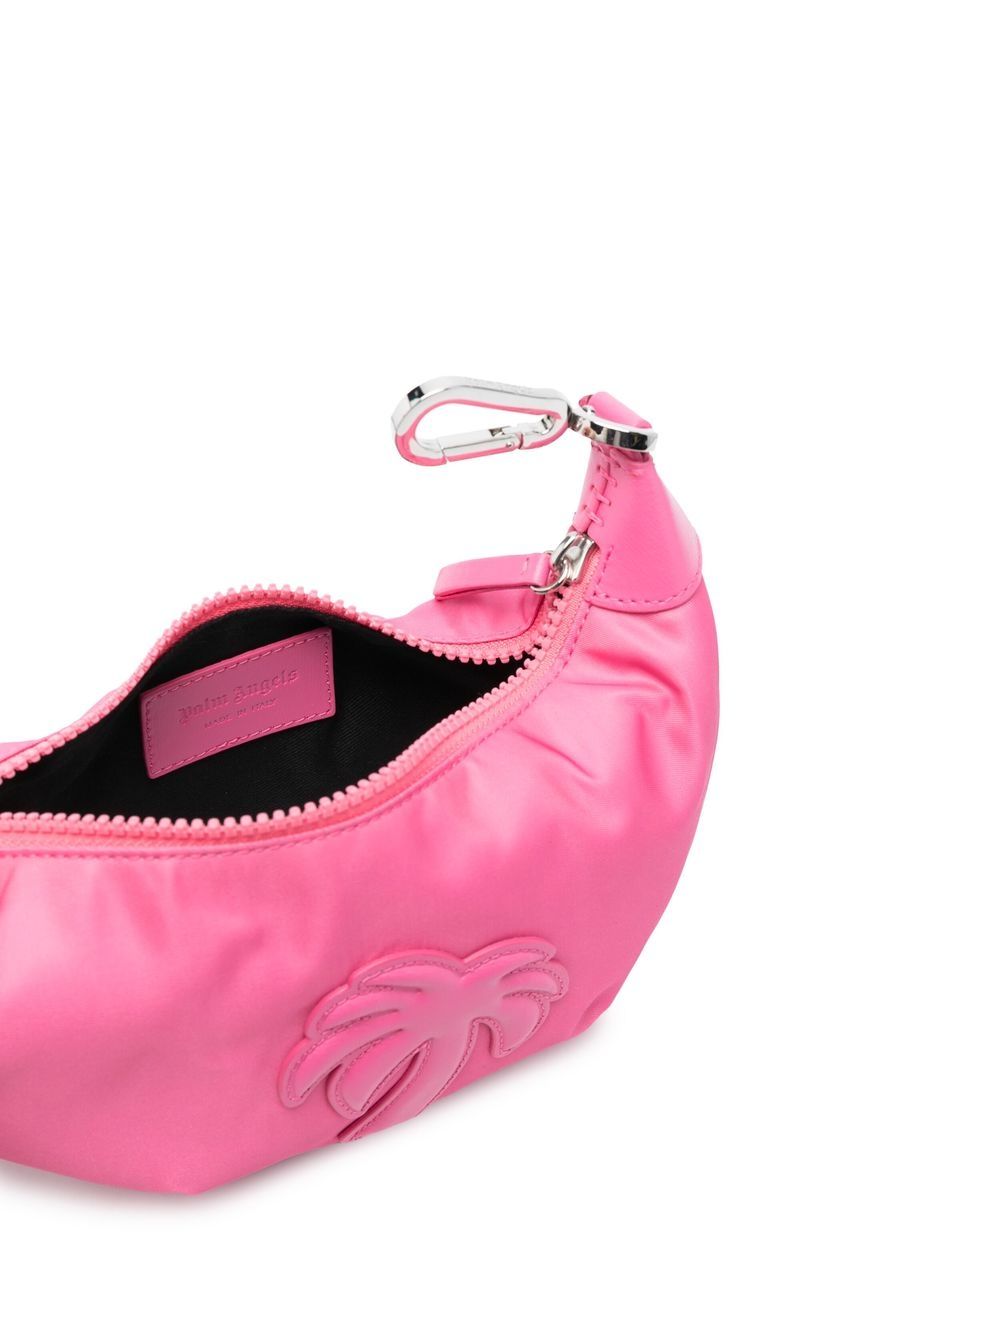 Palm Angels Bags.. Pink